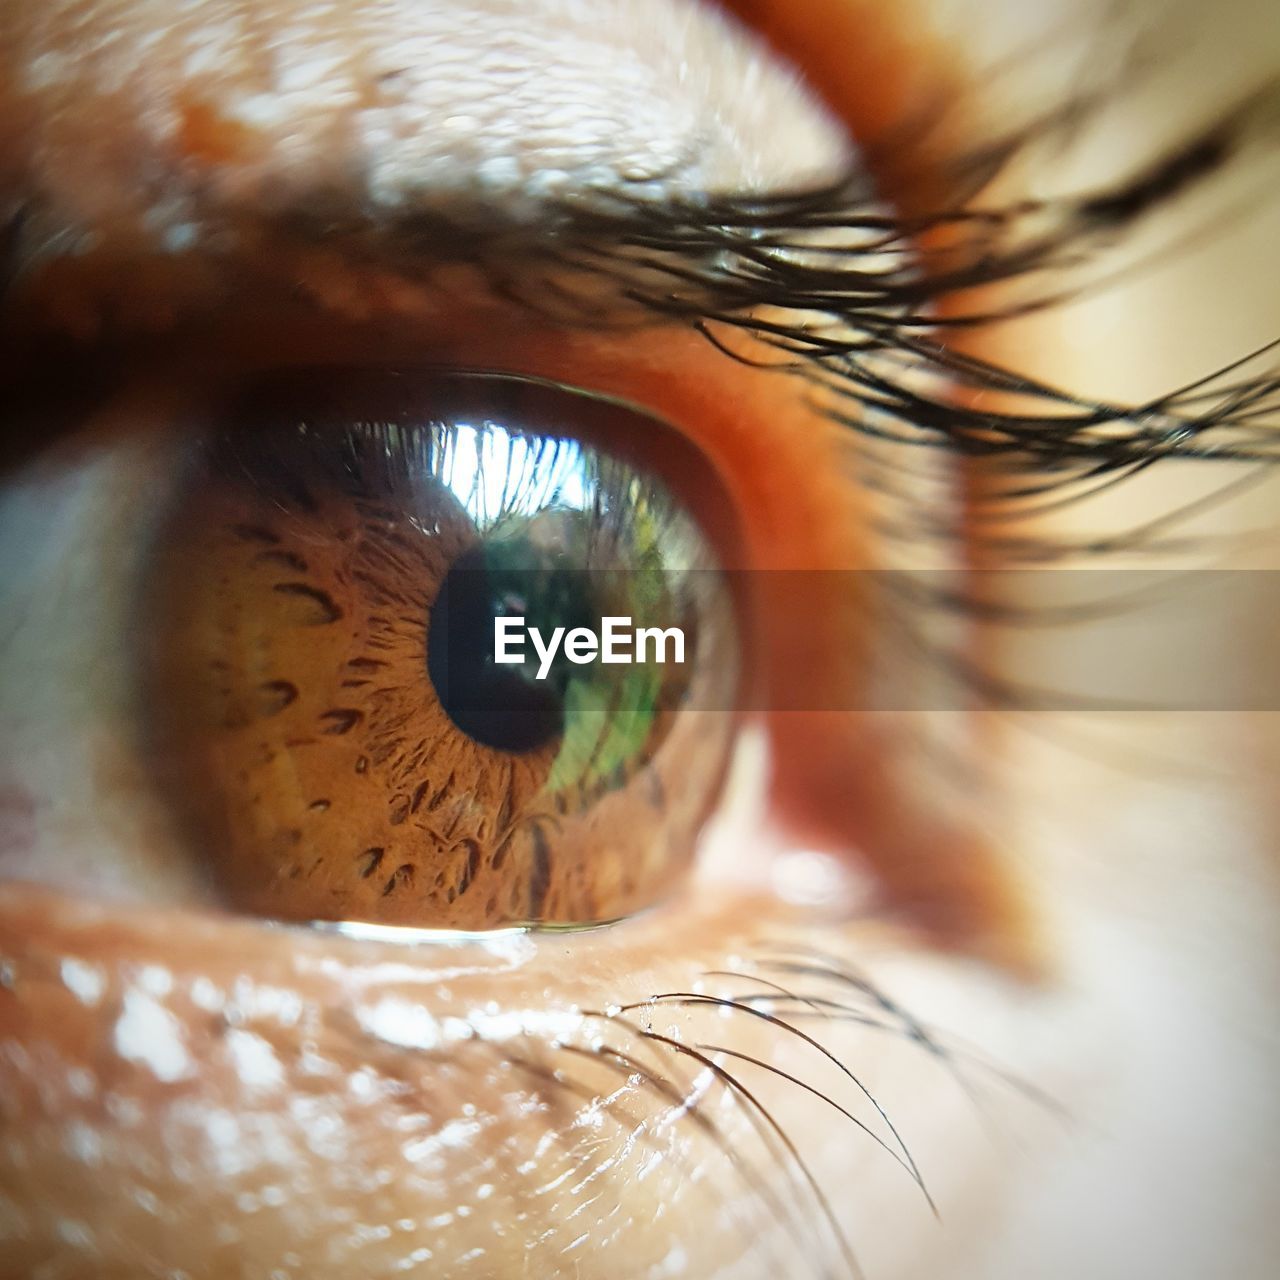 Cropped image of person eye